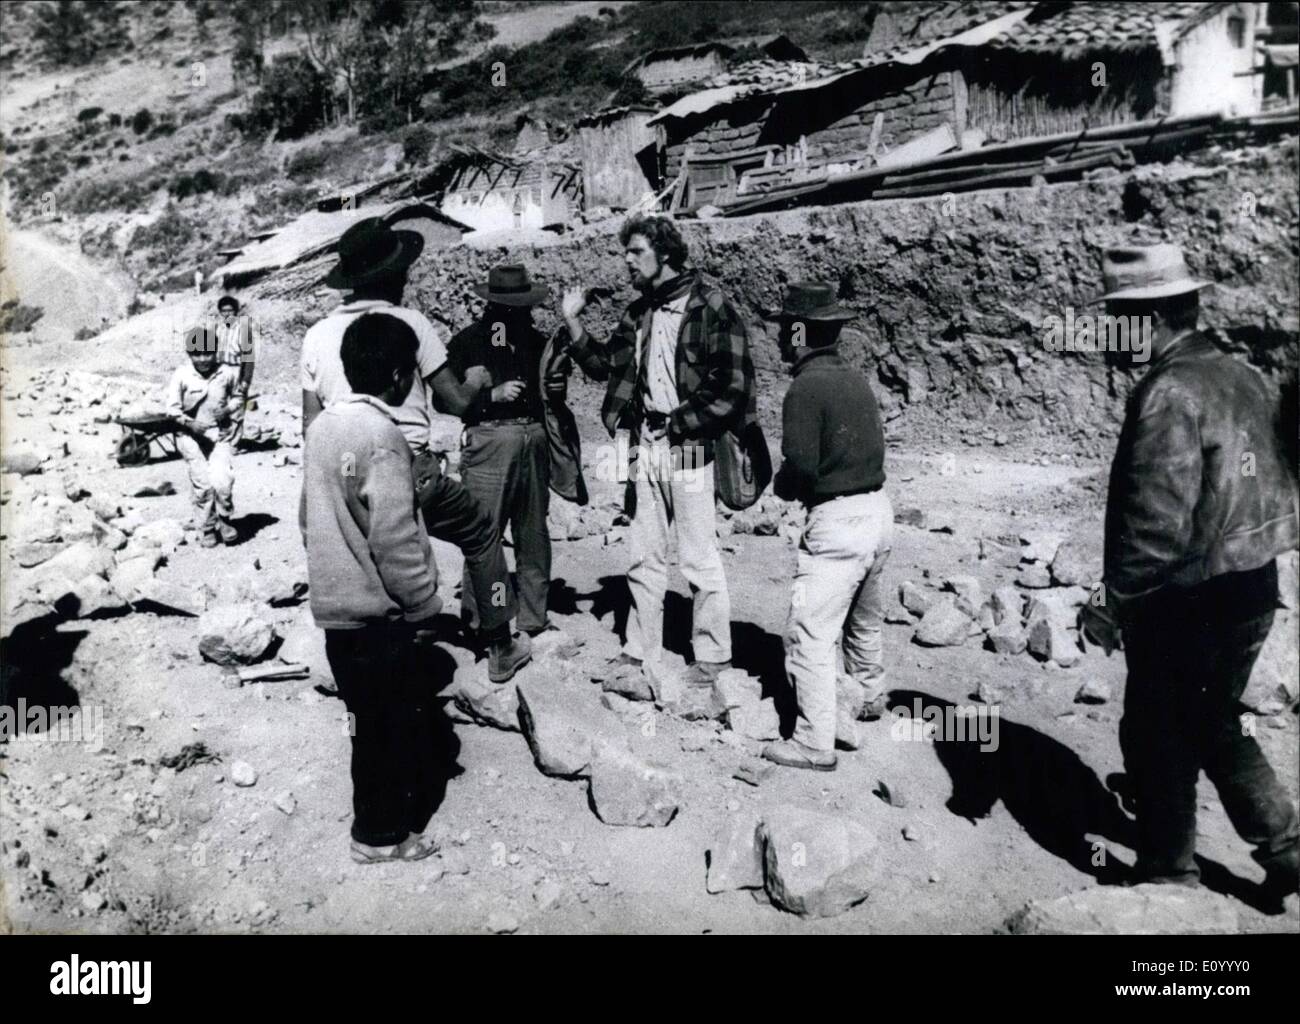 Dec. 12, 1971 - Development help is arriving in Huarez, Peru to help with the reconstruction after the severe earthquake of 1970. German Engineers and others are busy helping Peruvians with city, street, residence, and other reconstruction projects. Our picture shows one Stock Photo